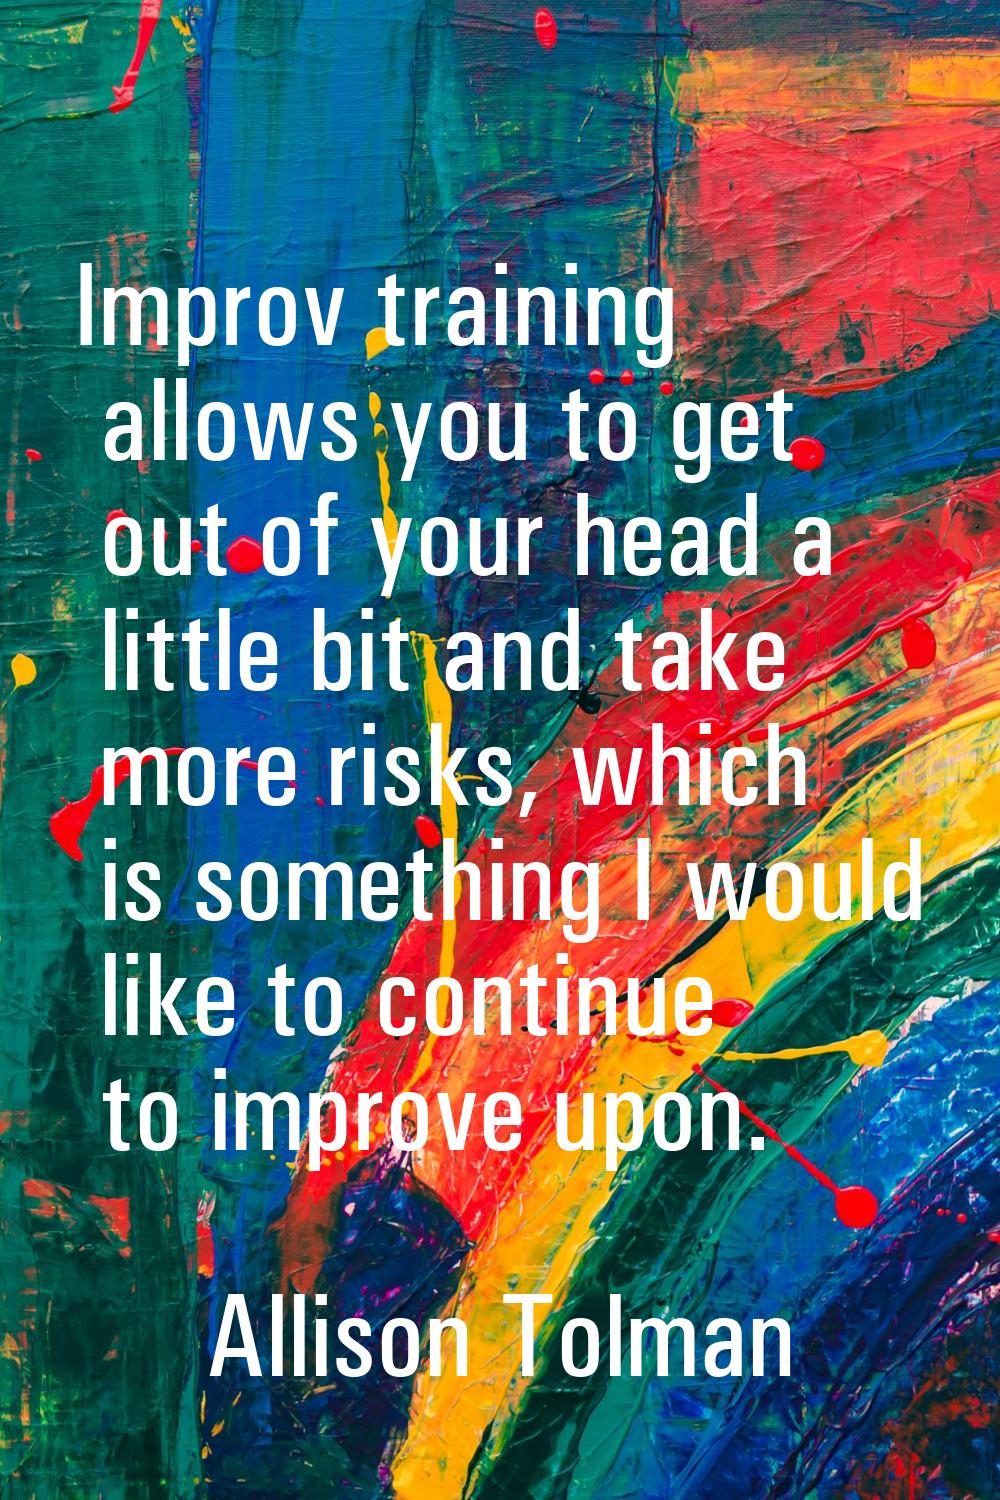 Improv training allows you to get out of your head a little bit and take more risks, which is somet